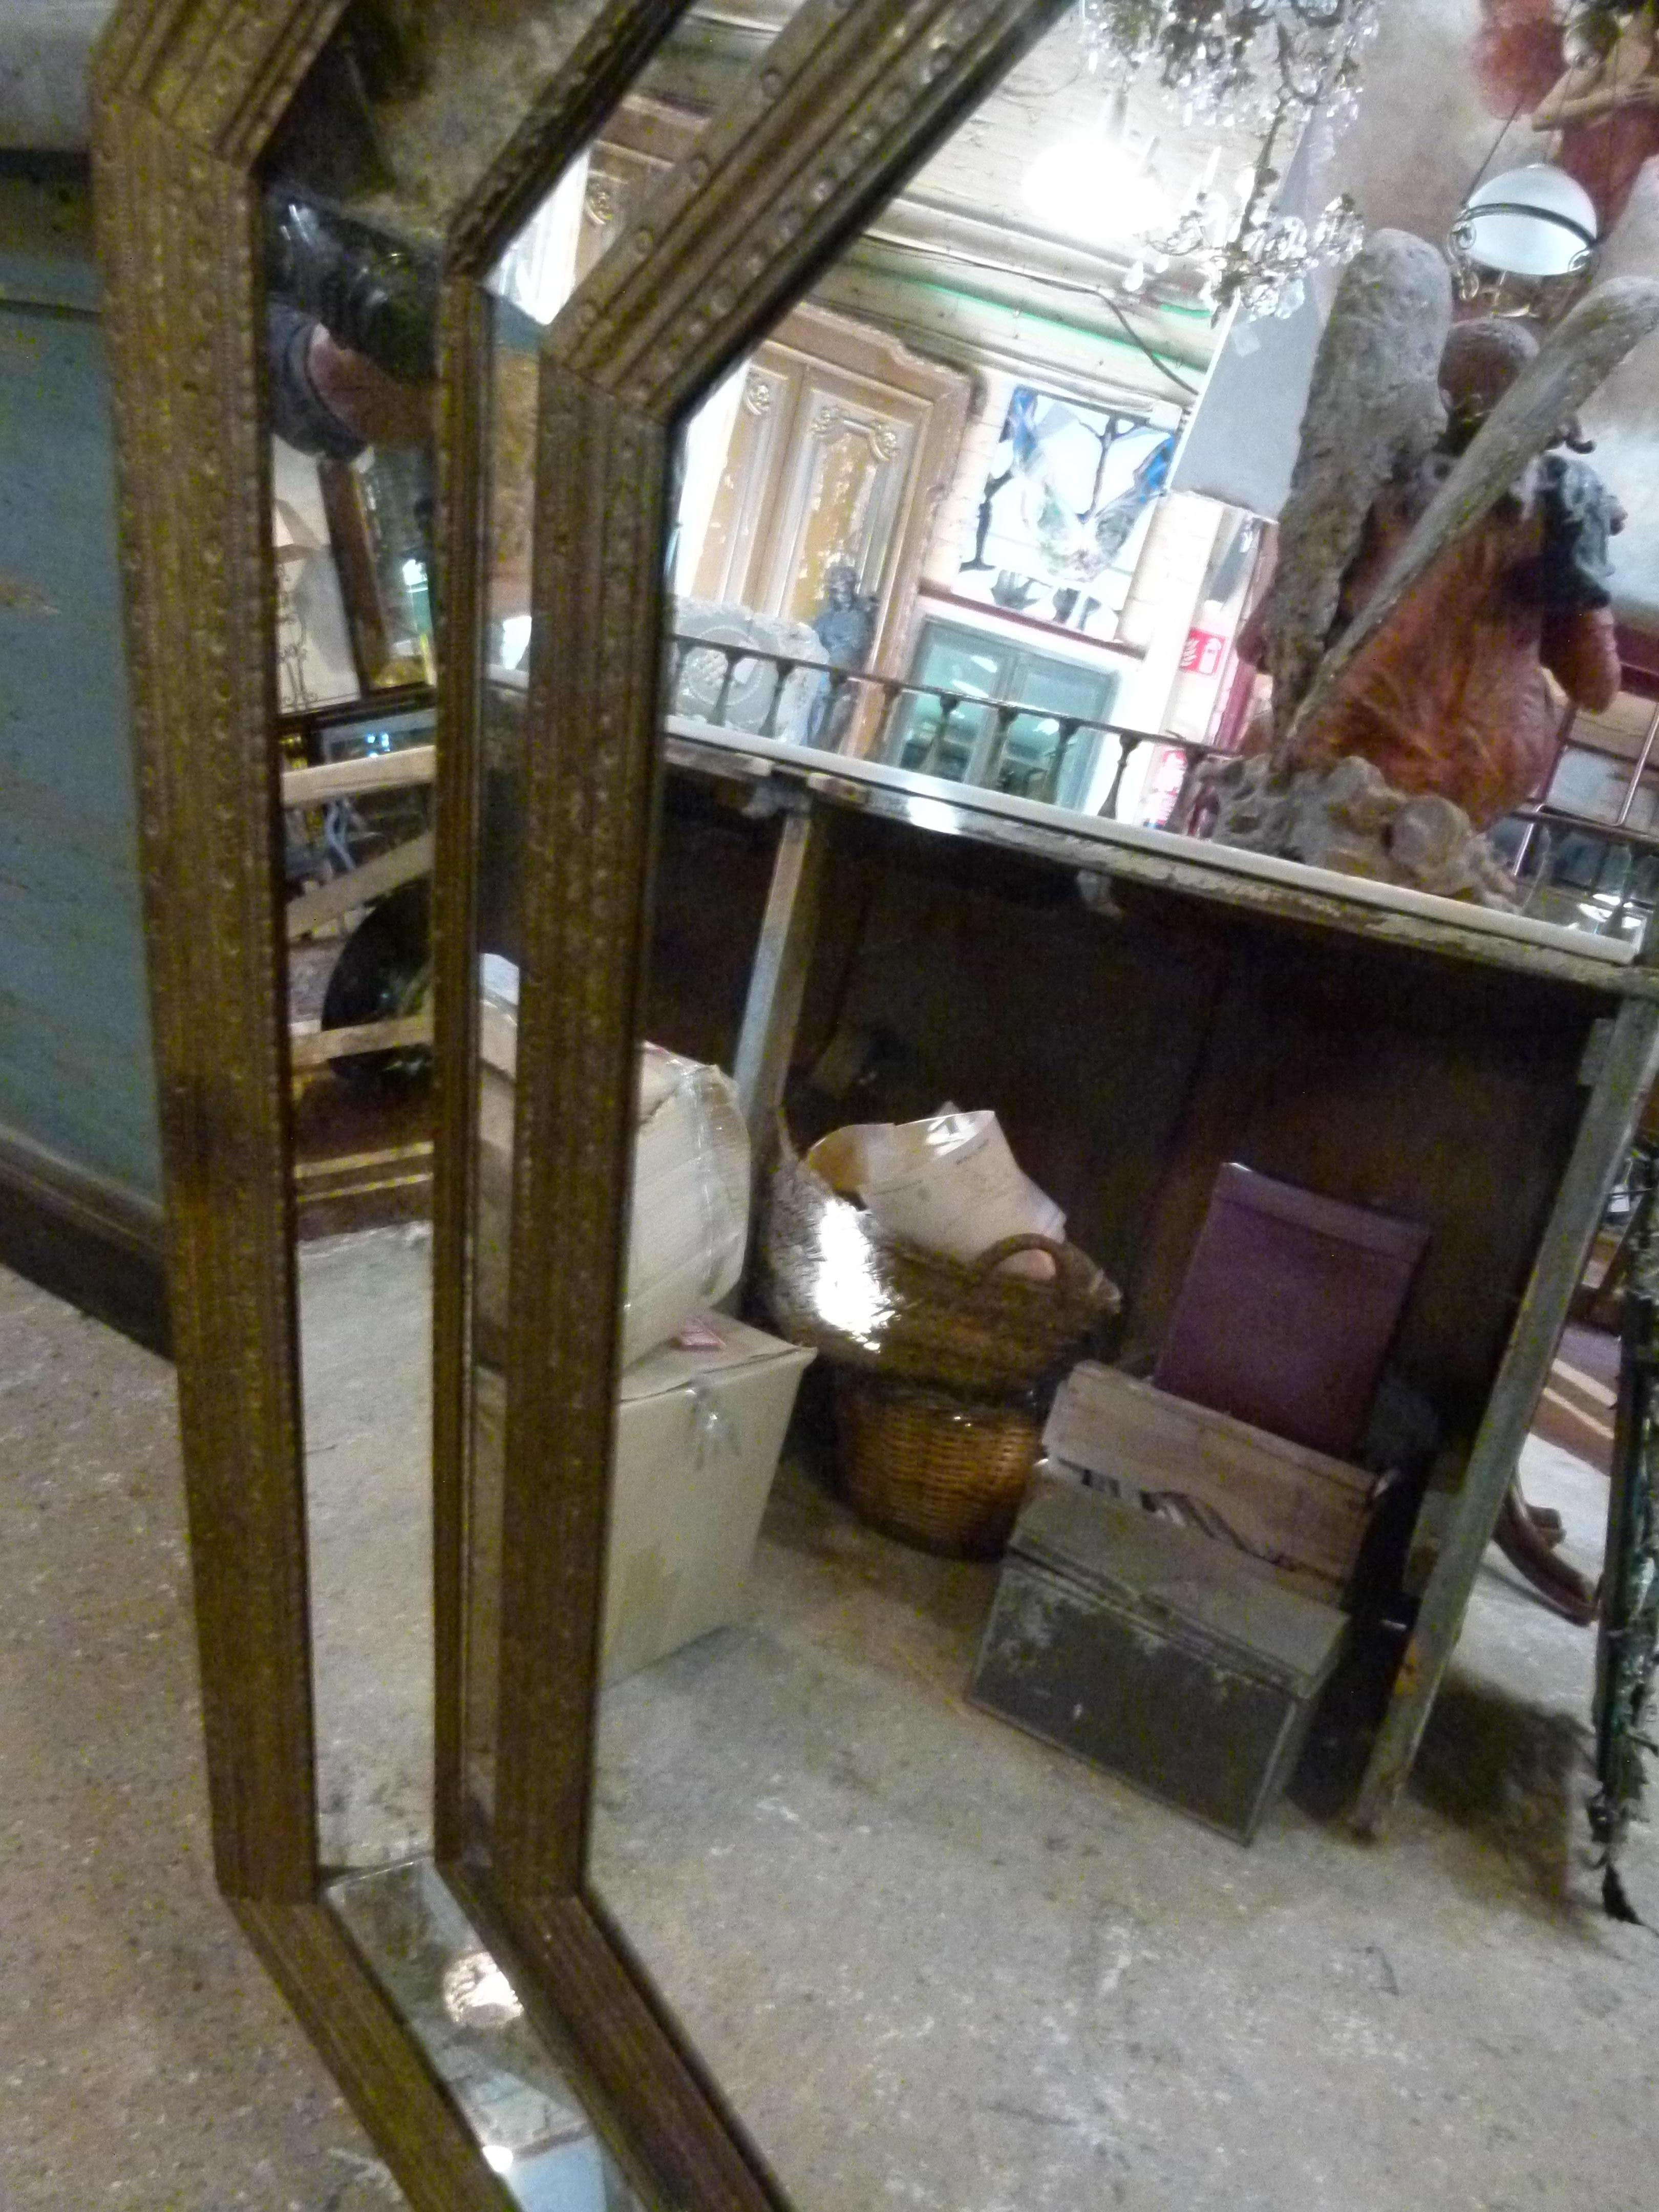 20th century octagonal shape iron double framed wall mirror. The mirror between the frames enhance perspective and volume to this piece, which makes it very special.

